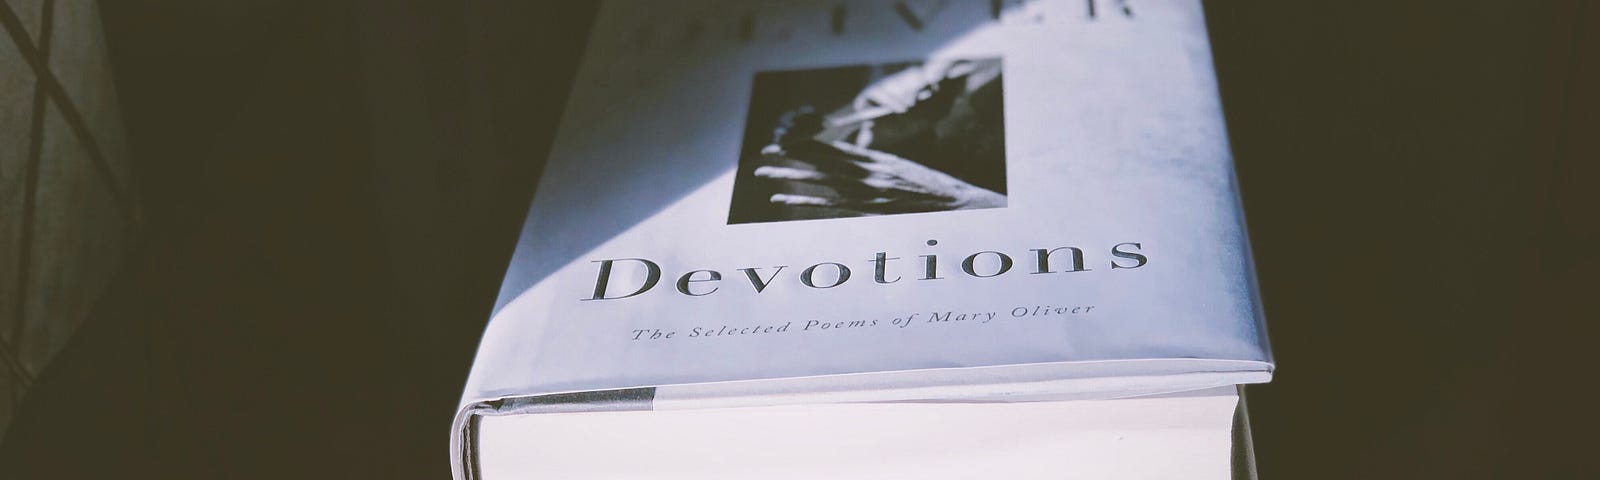 Photo of Mary Oliver’s book, Devotions.